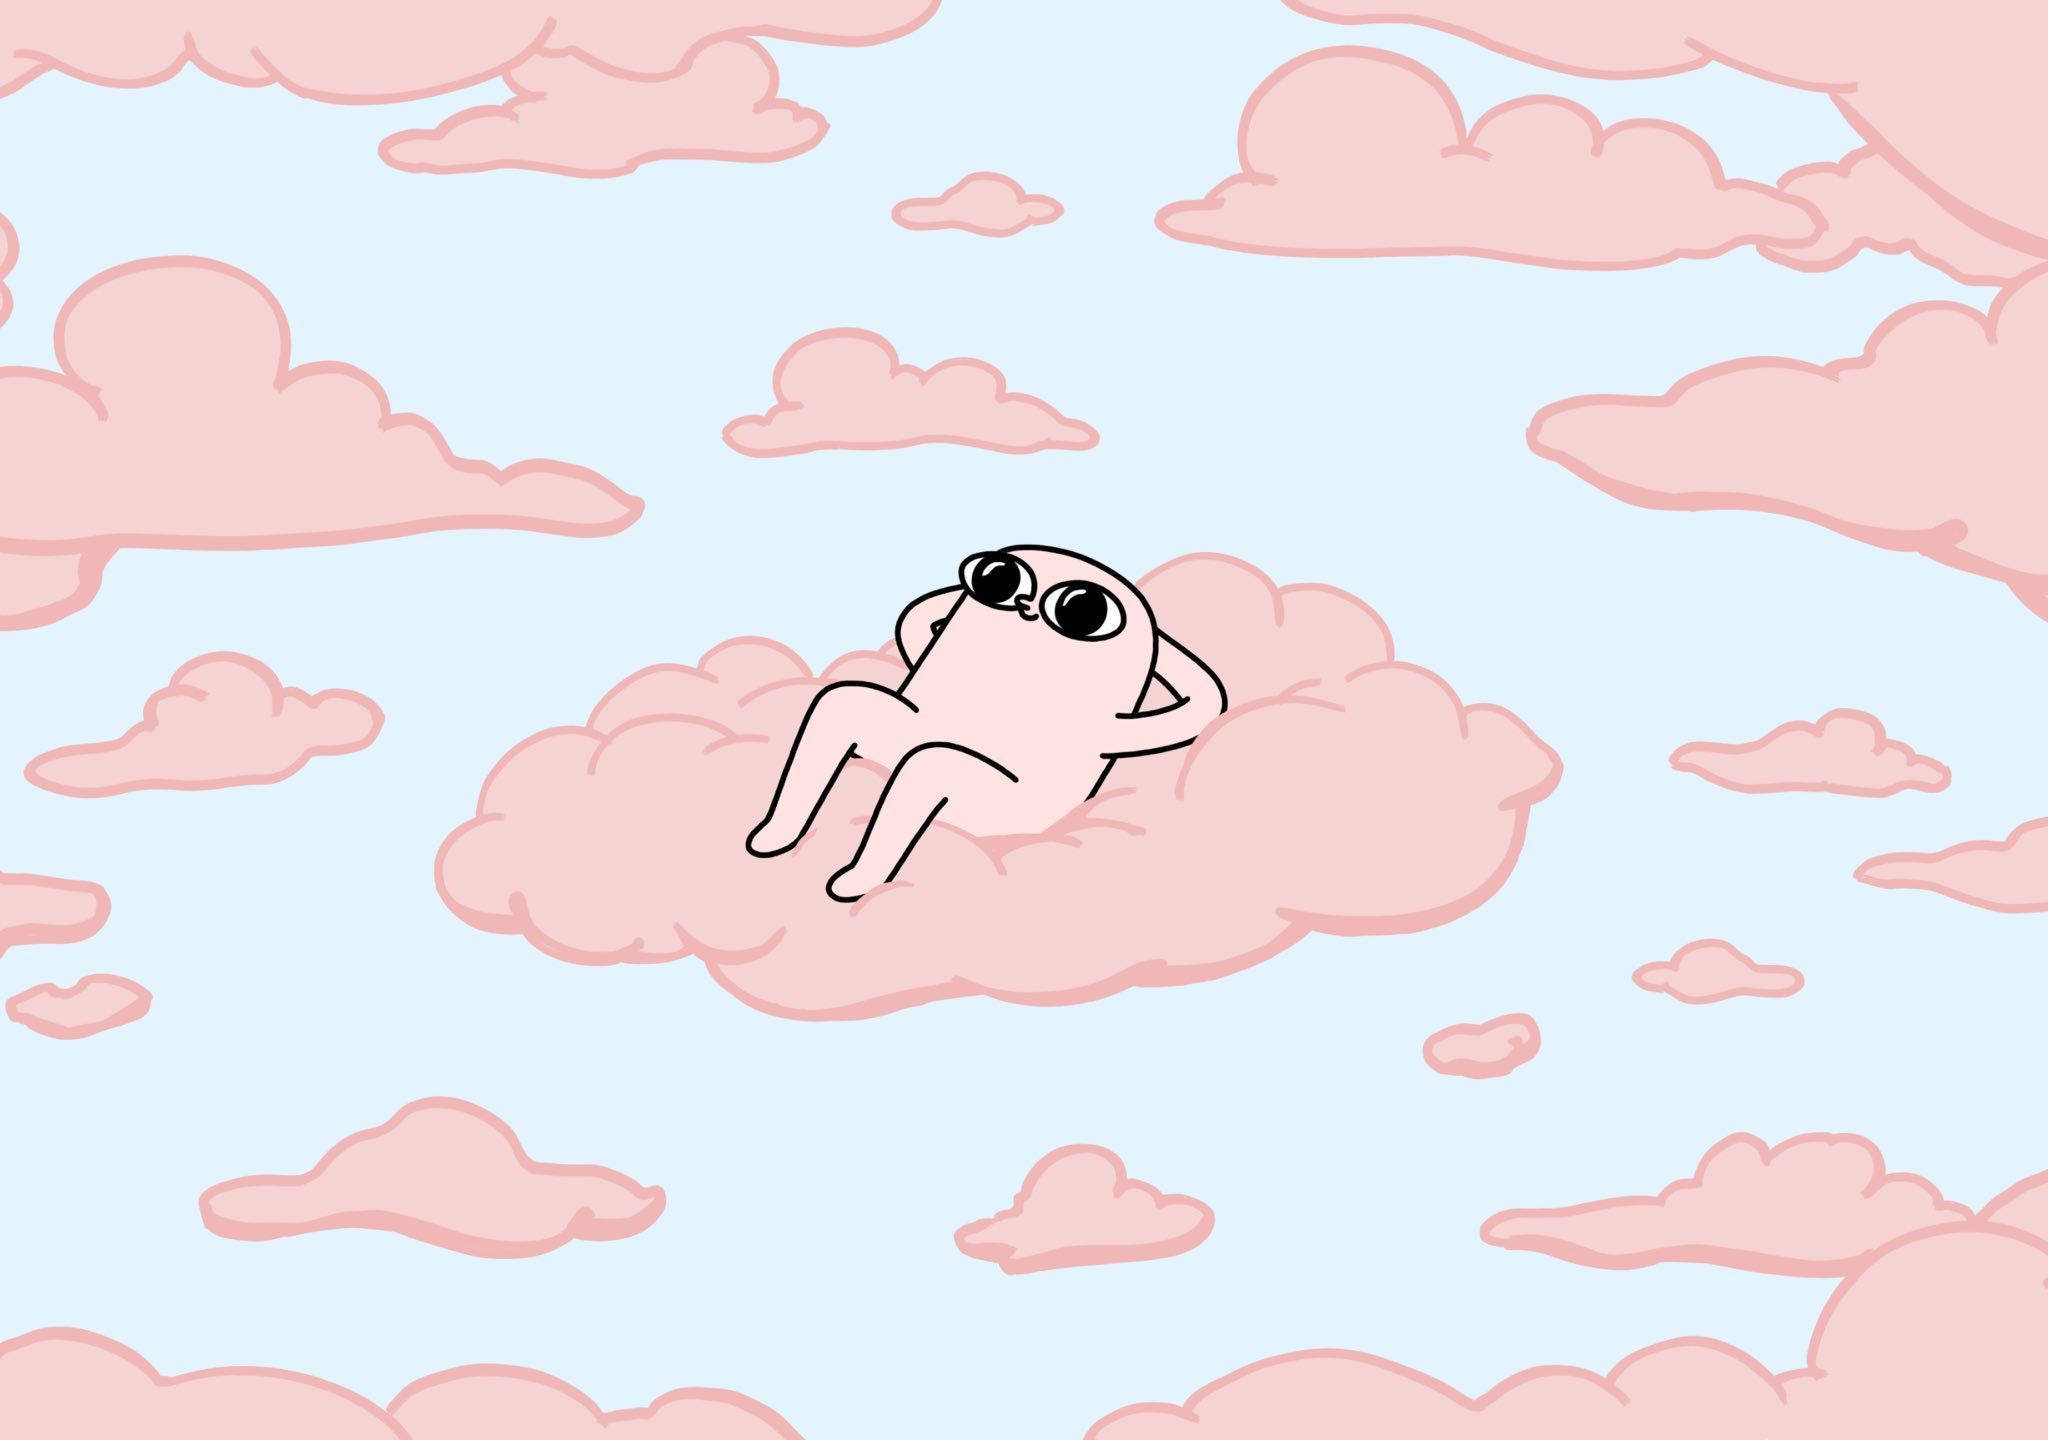 Ketnipz Chilling On Pink Clouds Pinterest Aesthetic Background